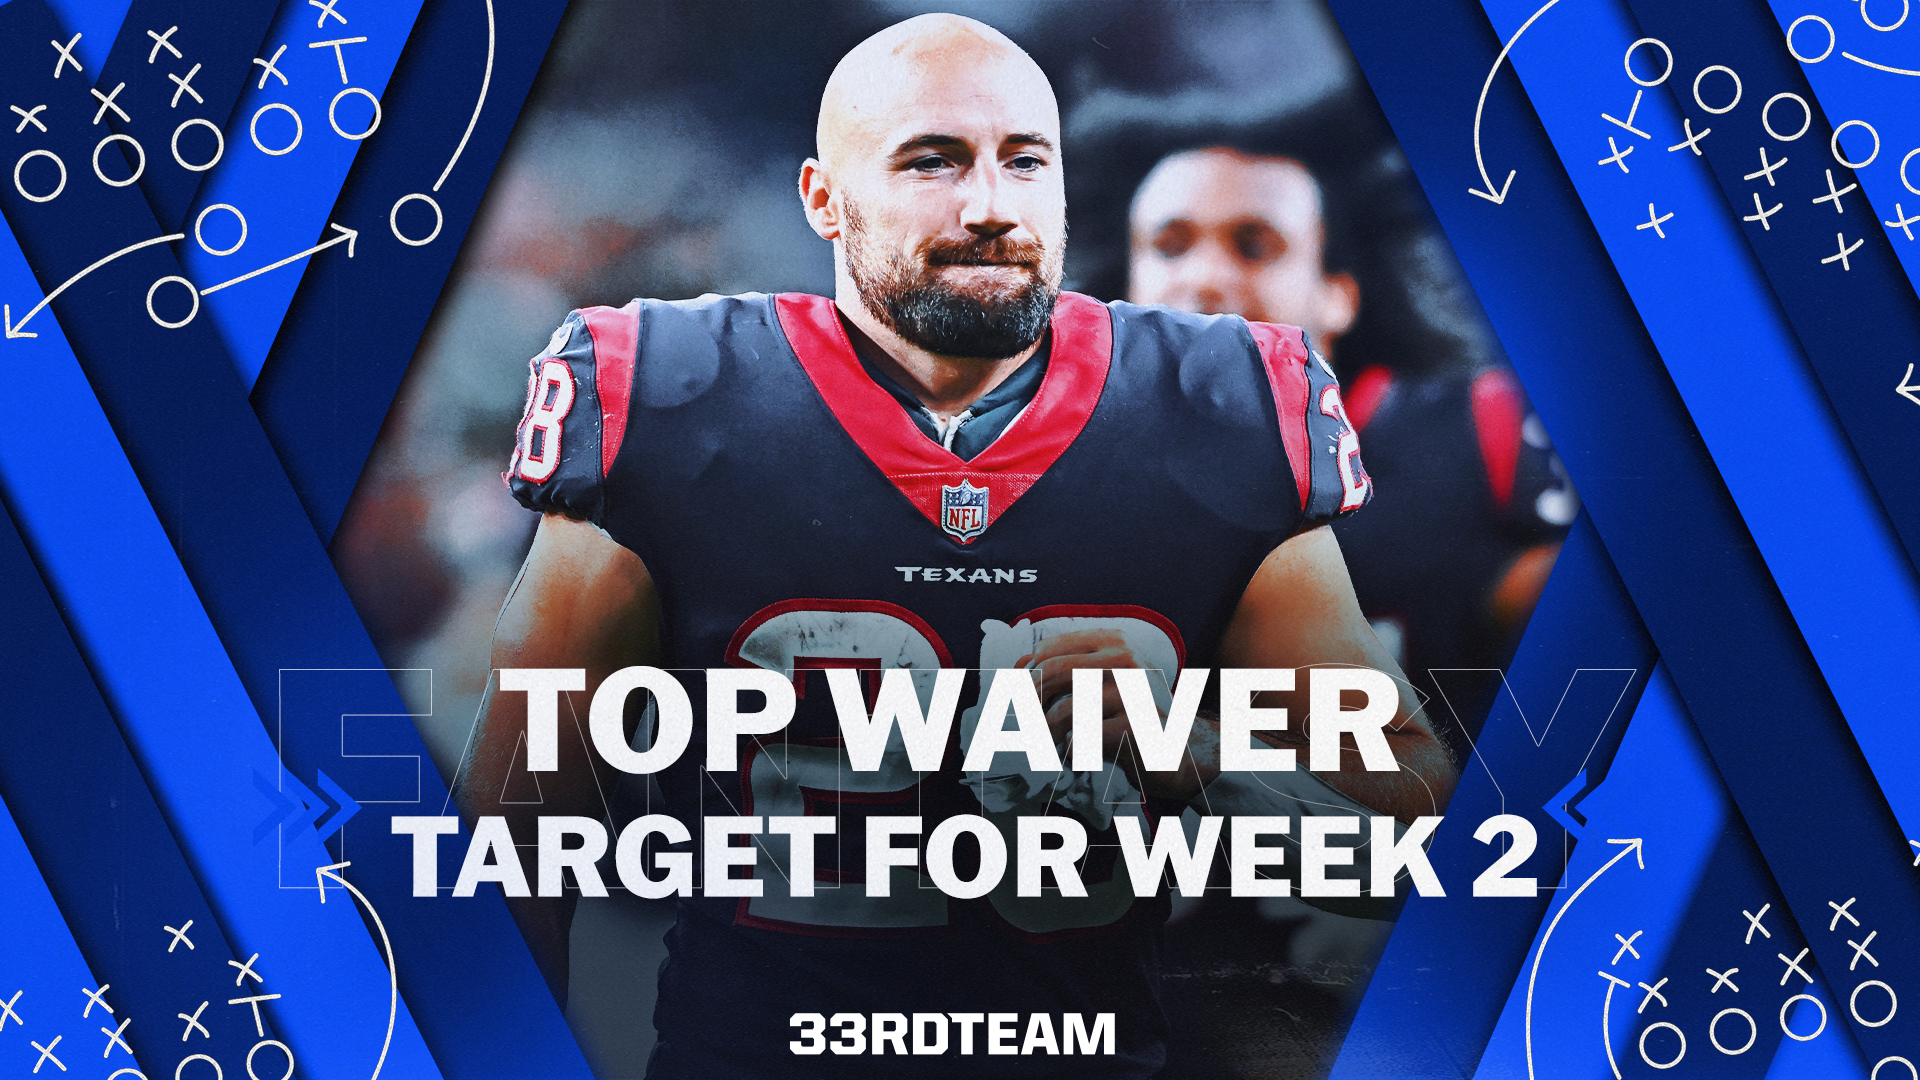 Ben Wolby’s Top Waiver Target For Week 2